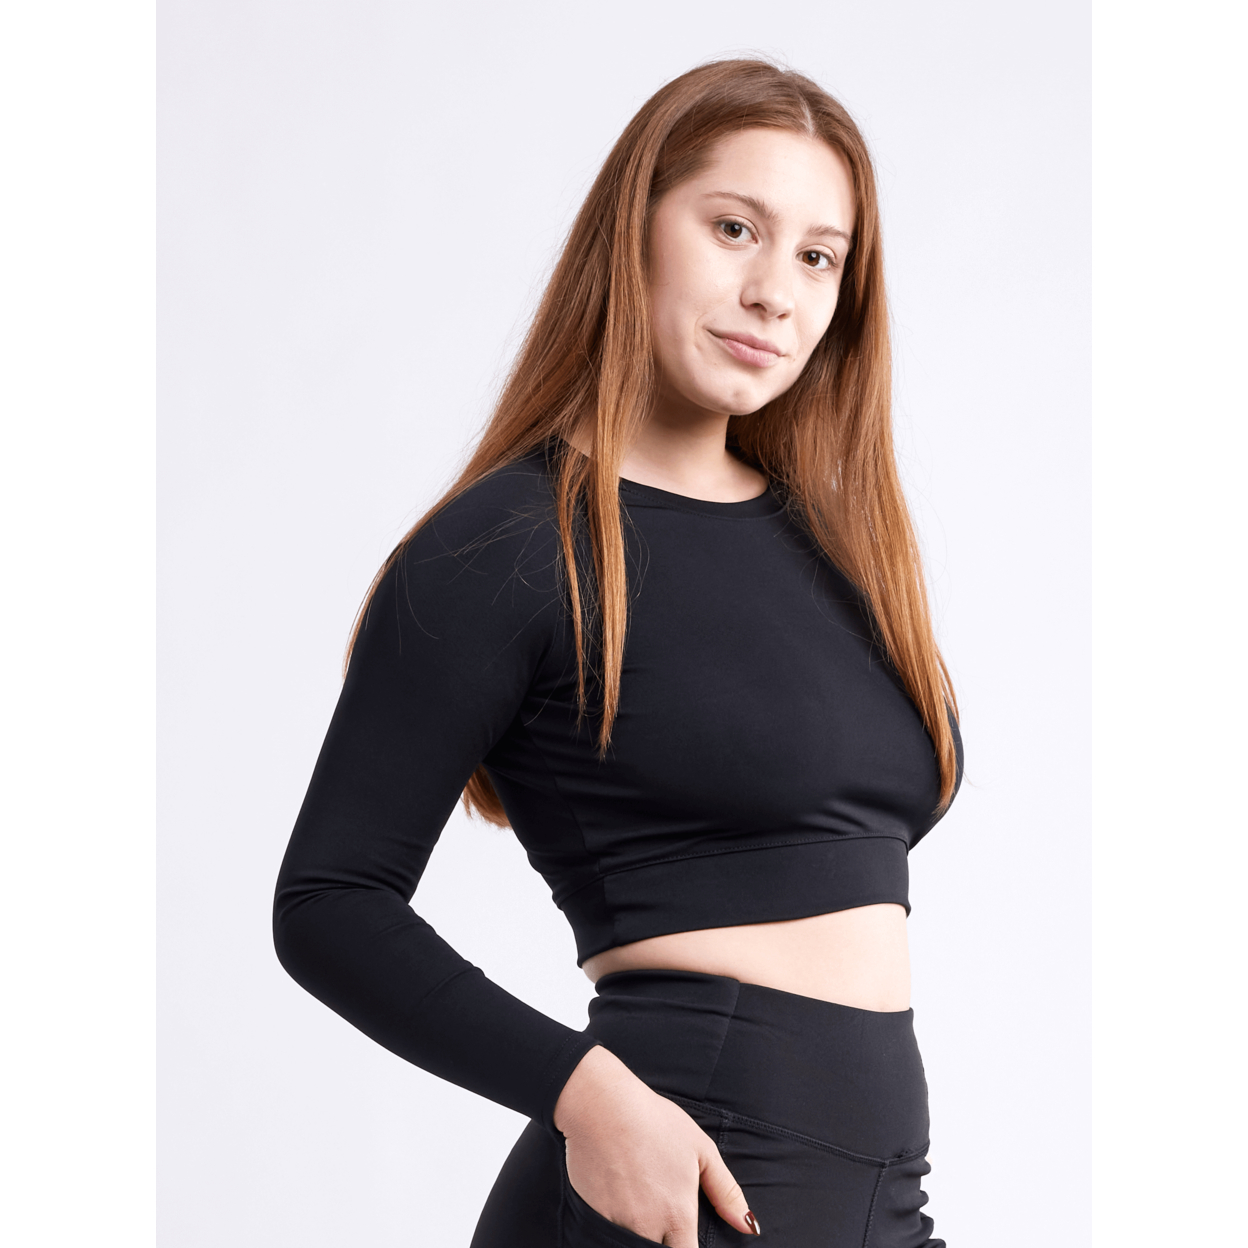 Long-Sleeve Crop Top - Rose Dust, Large / Extra-Large